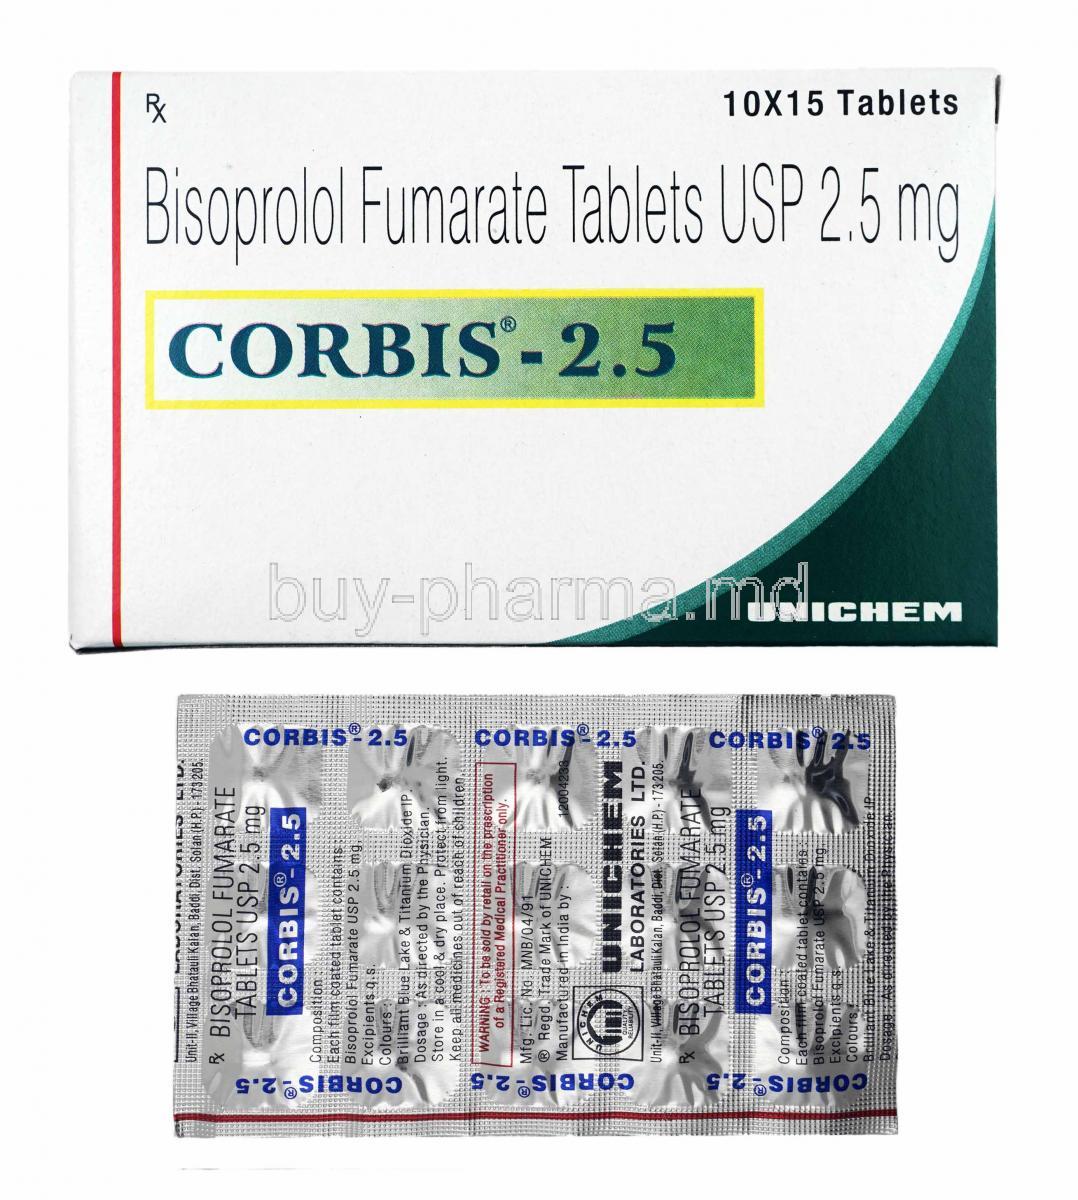 Corbis, Bisoprolol 2.5mg box and tablets